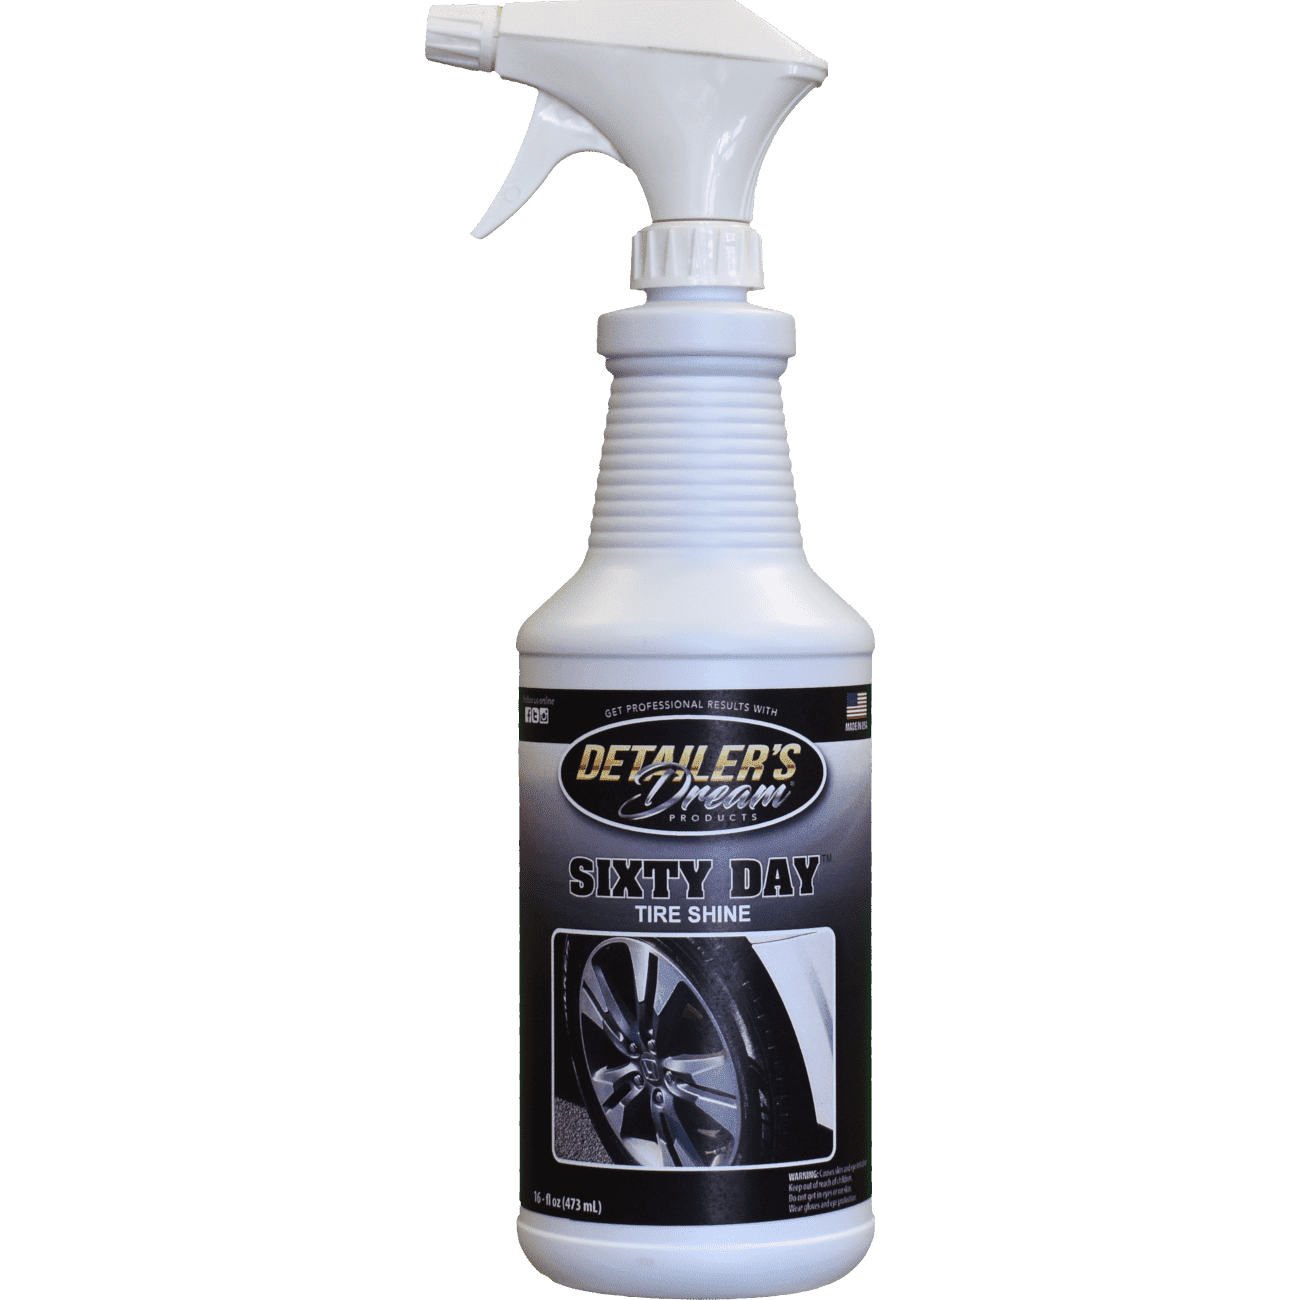 SIXTY DAY™-The "Once a Season"™ Tire Shine-Detailer's Dream